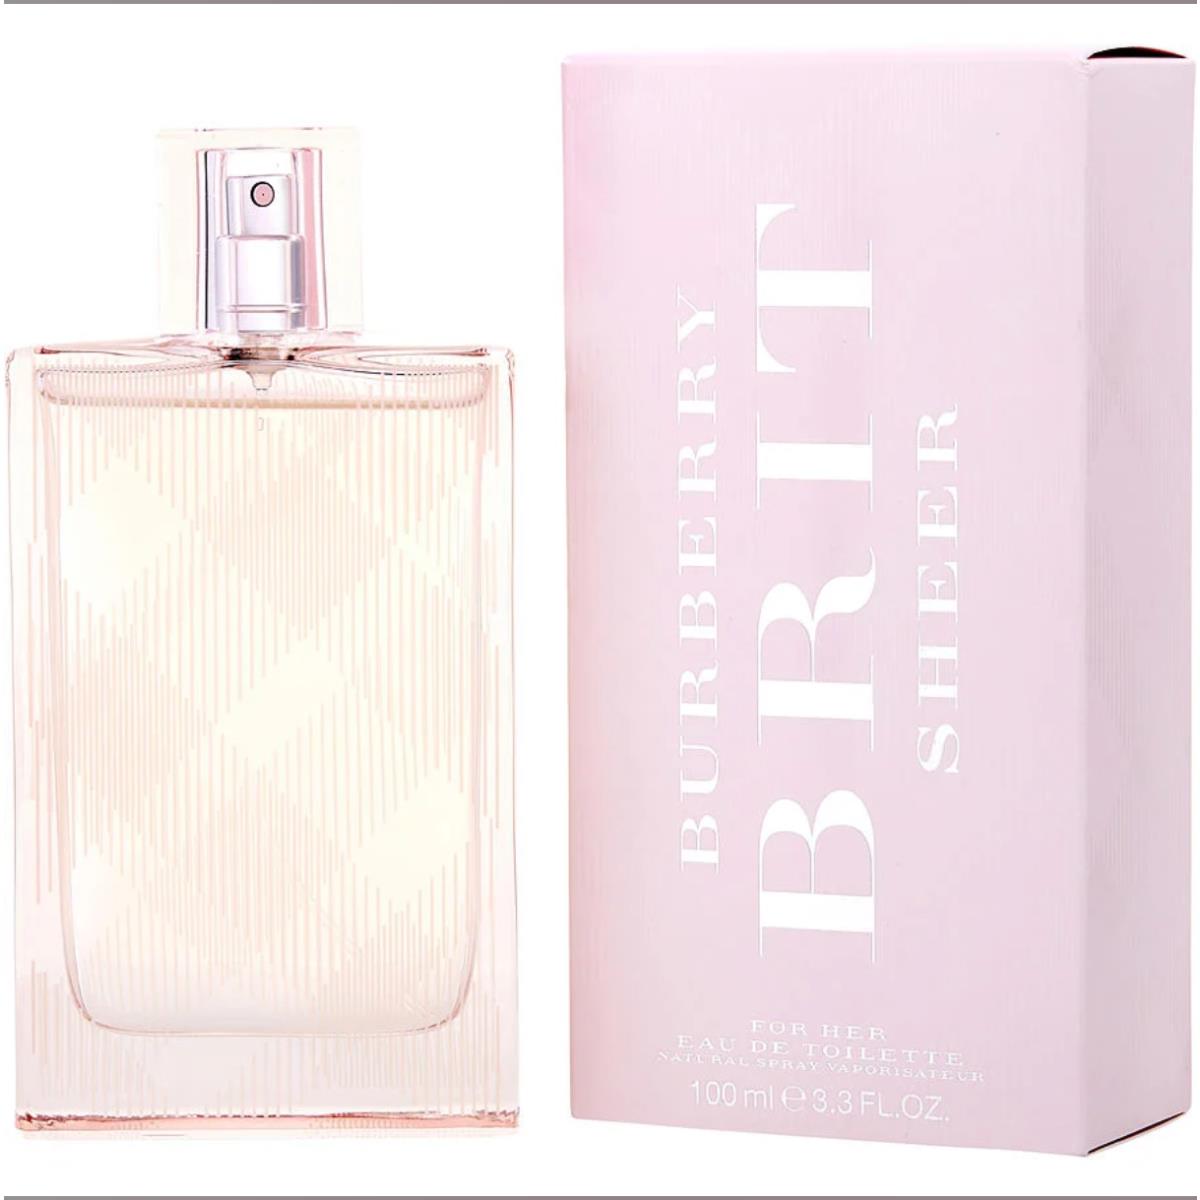 Burberry Brit Sheer by Burberry 3.3oz 100ml Edt Perfume For Women